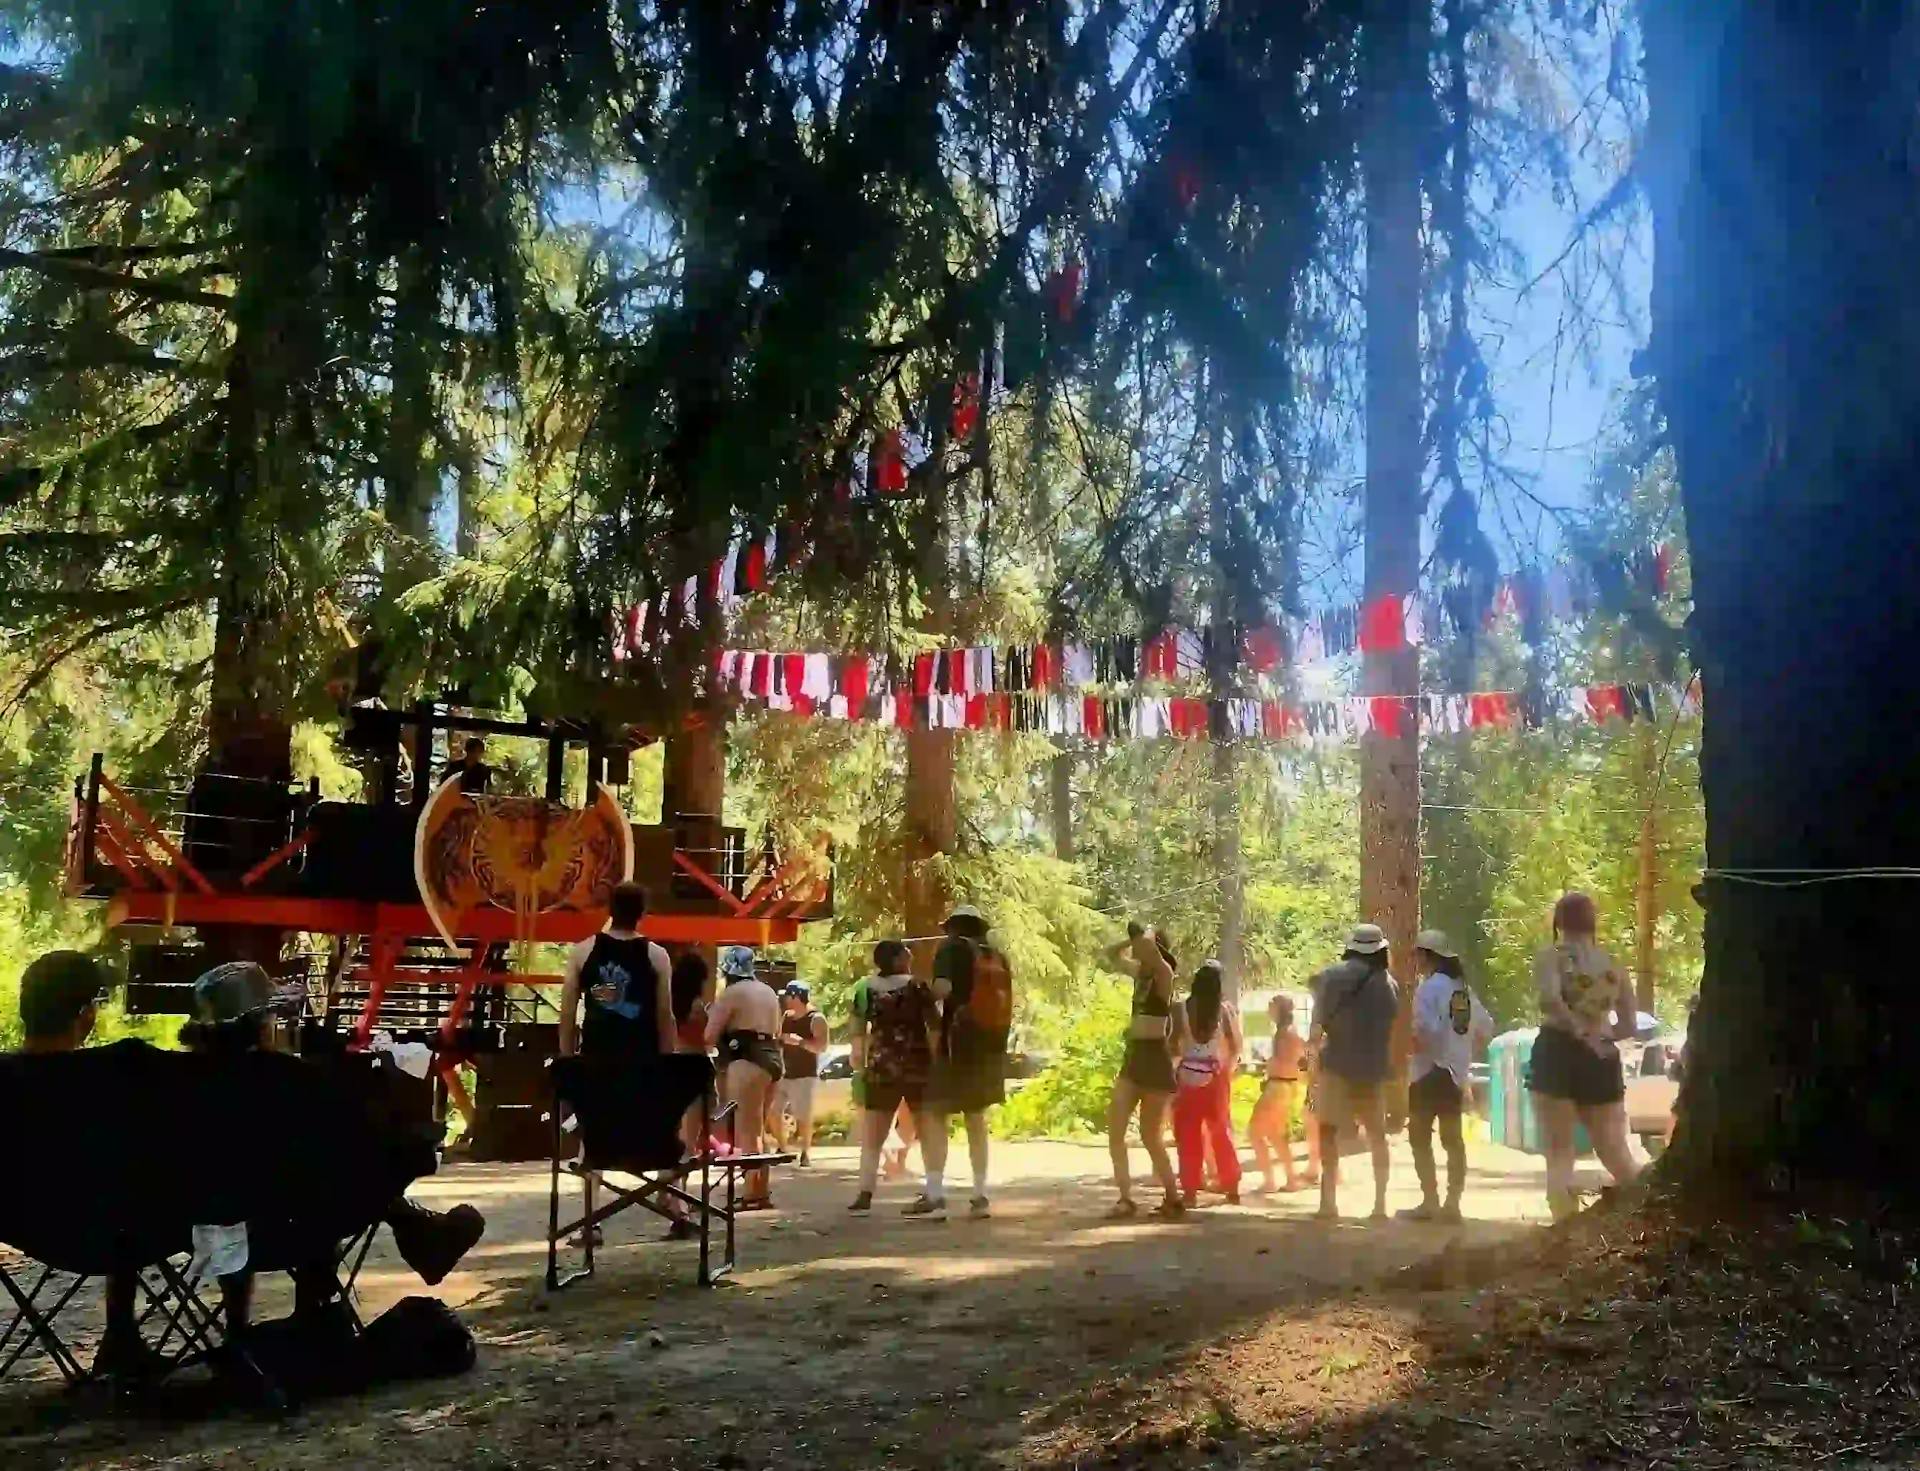 Leif's Beach stage at ValhallaFest with a casual atmosphere, market stalls, and forest backdrop.